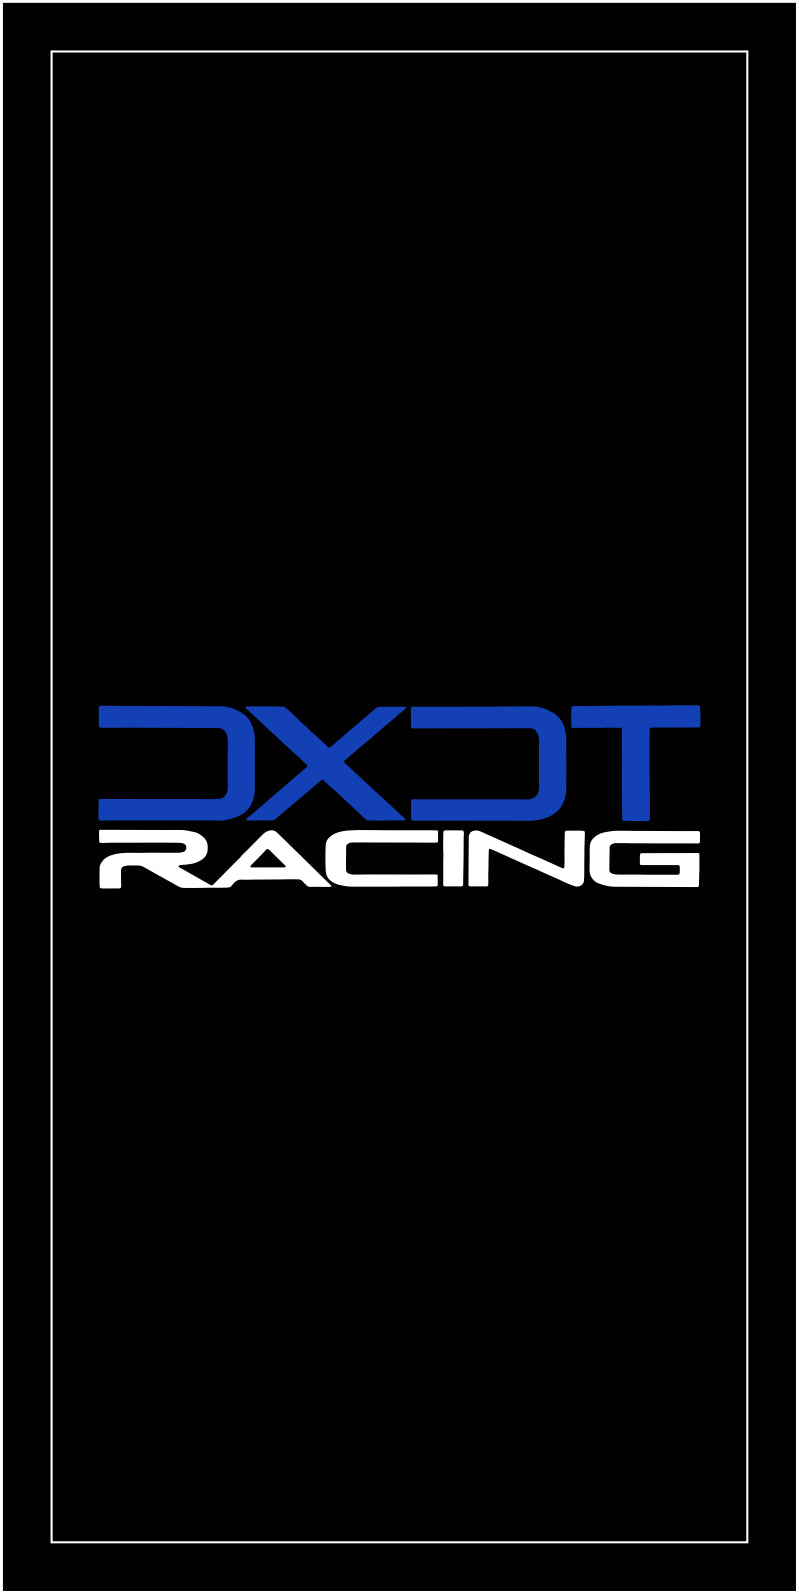 DXDT Racing §